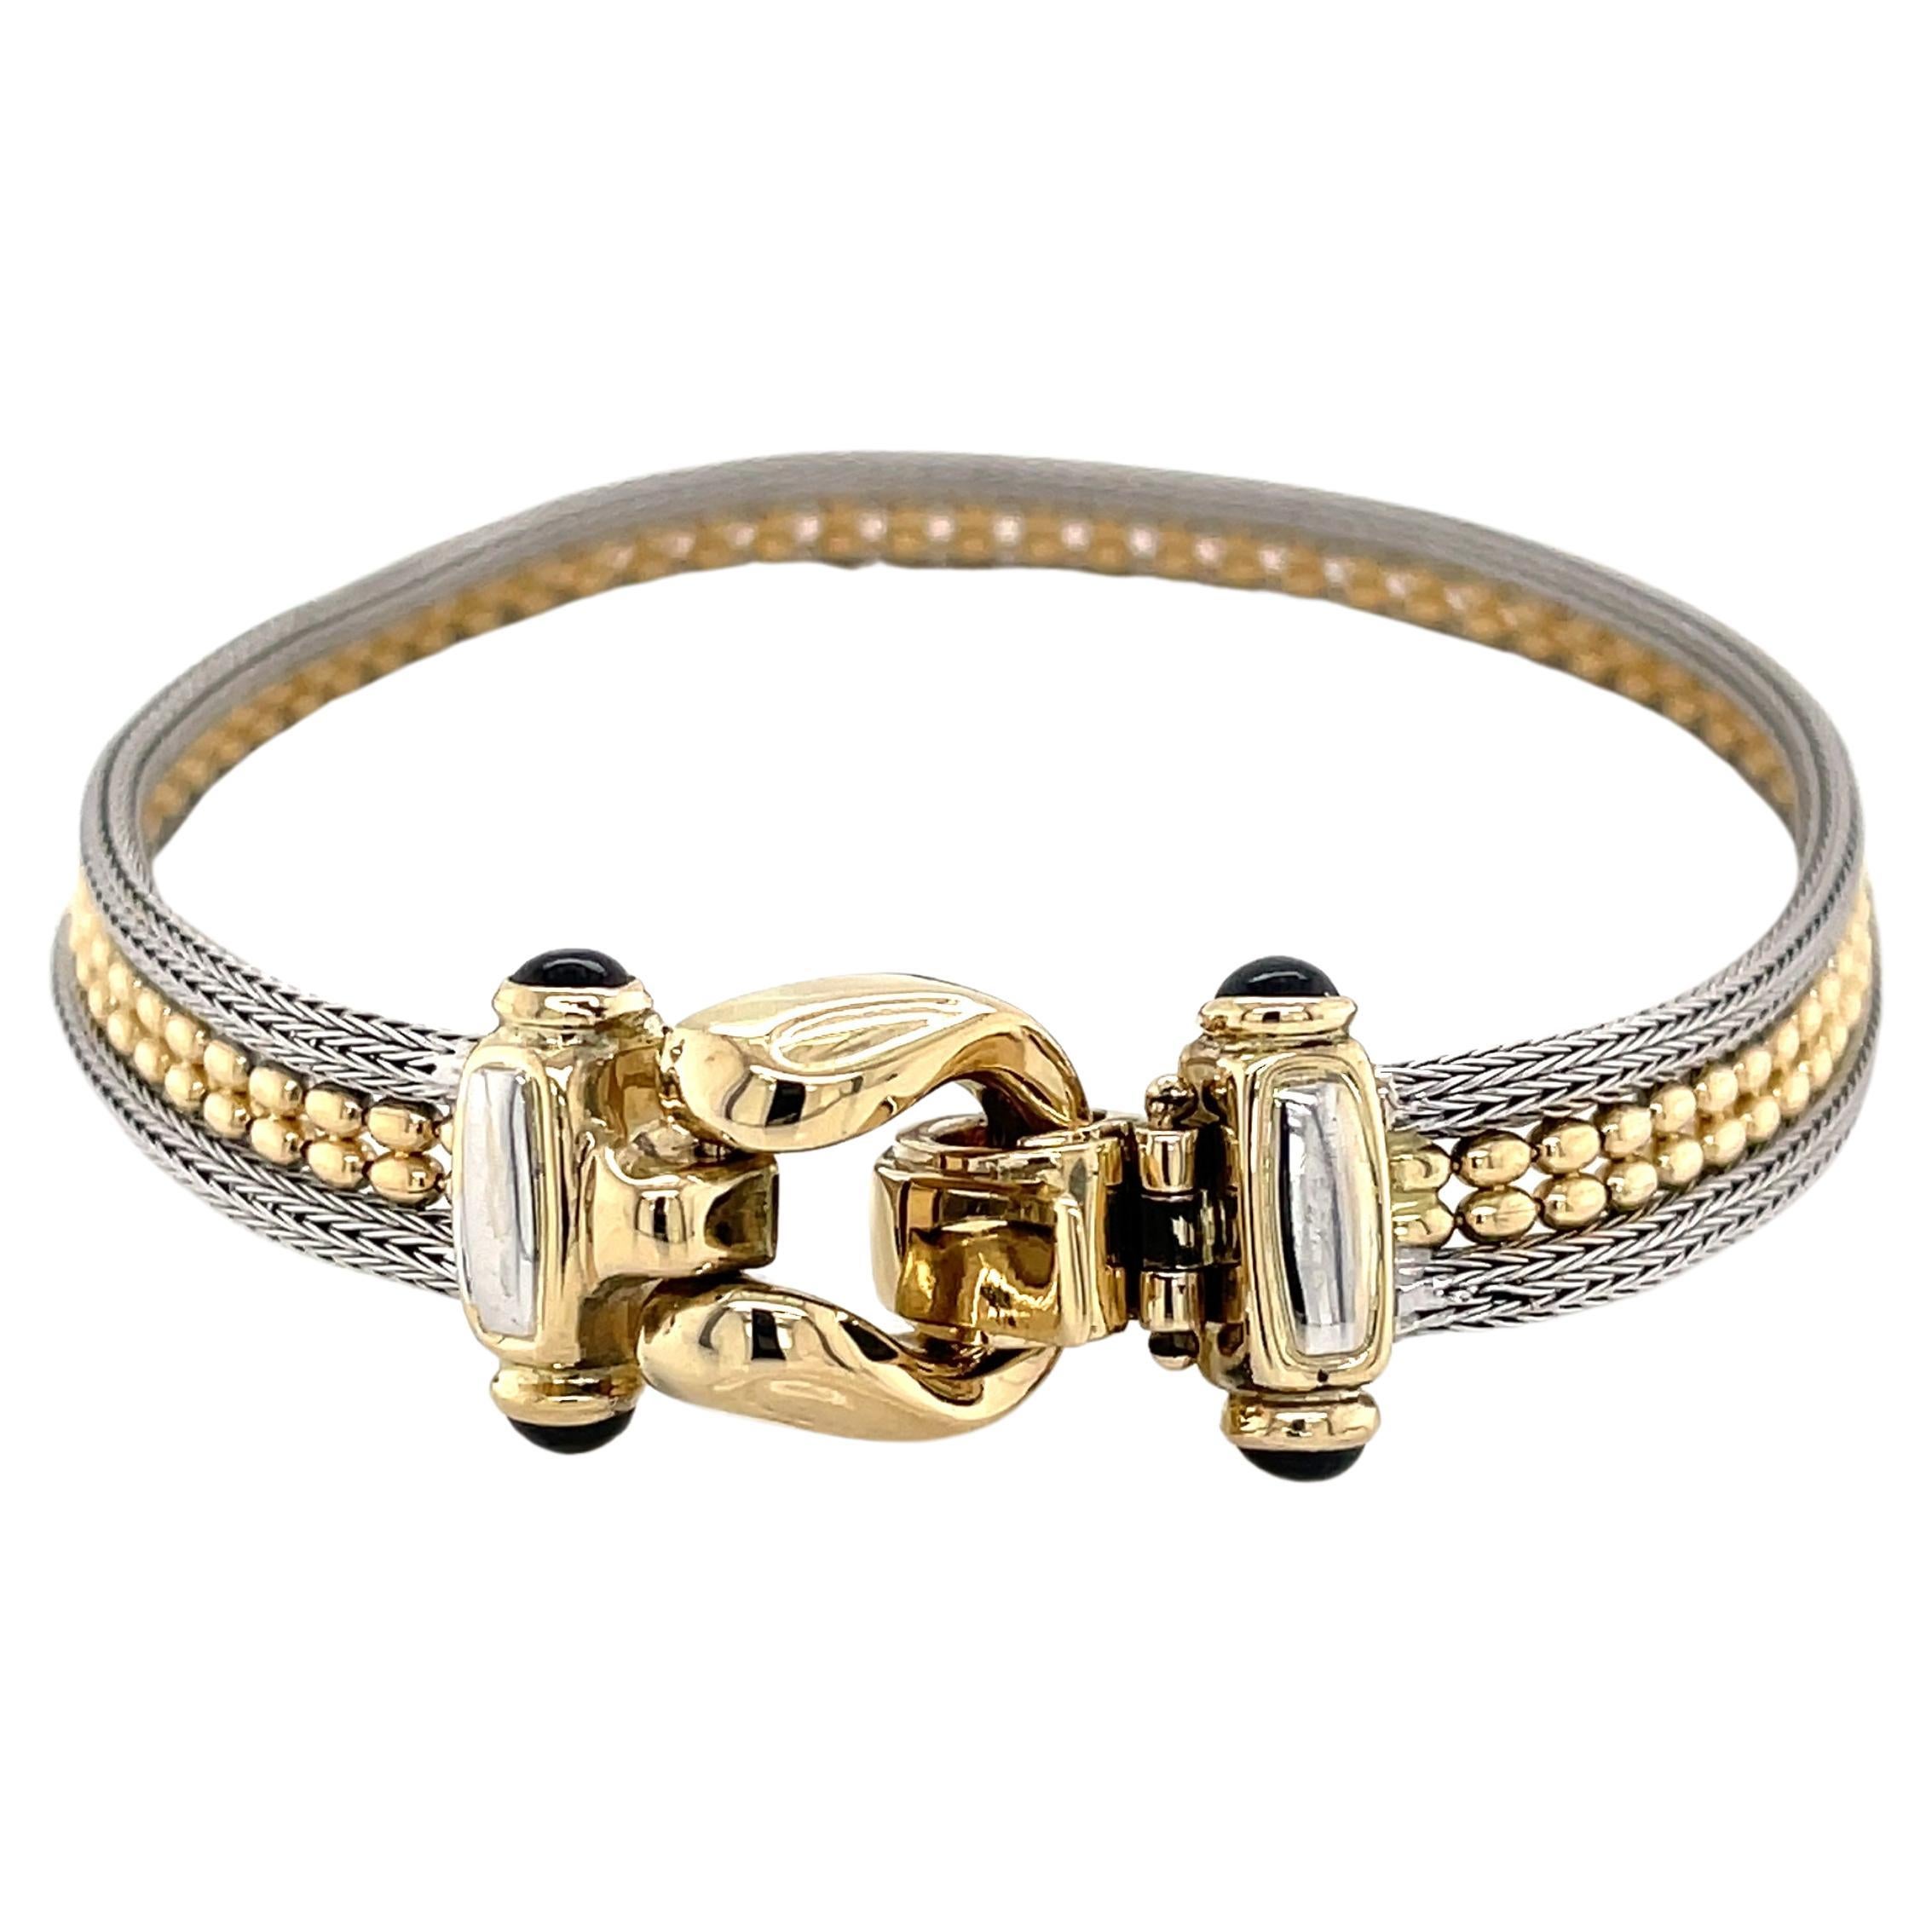 Two Tone 14 Karat Gold Buckle Bracelet with Onyx Cabochon Accents For Sale